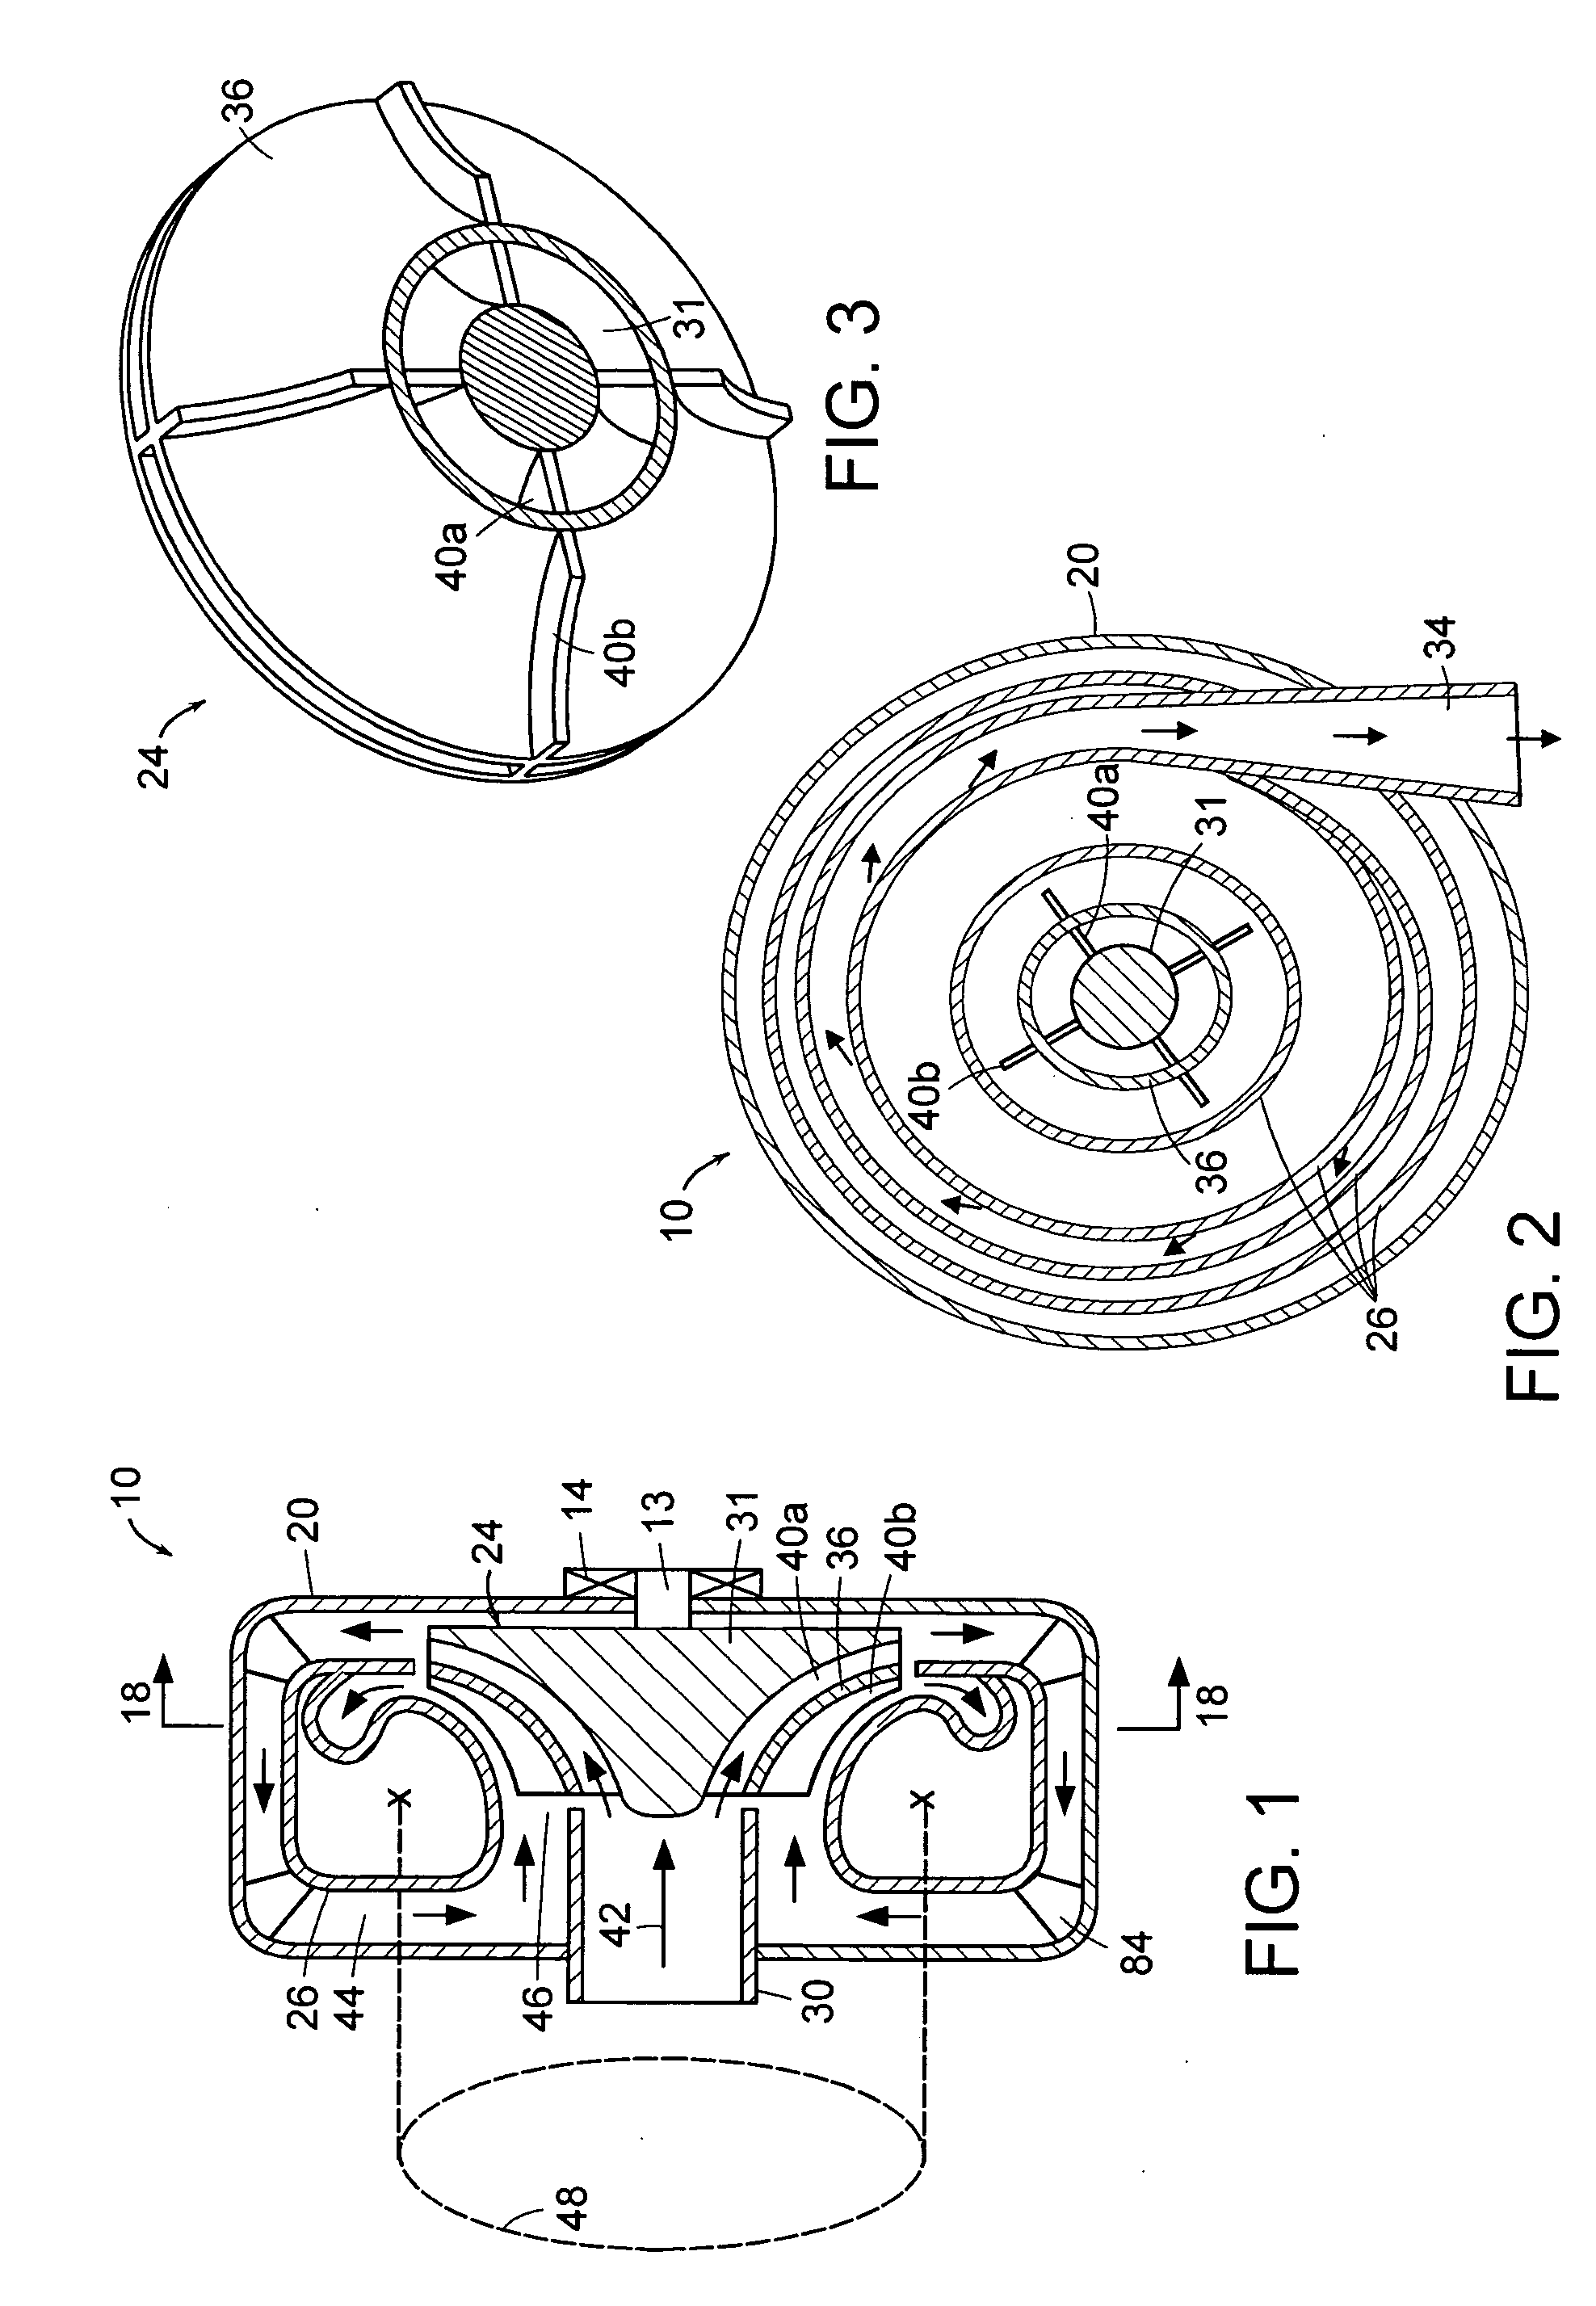 Fluid transfer controllers having a rotor assembly with multiple sets of rotor blades arranged in proximity and about the same hub component and further having barrier components configured to form passages for routing fluid through the multiple sets of rotor blades